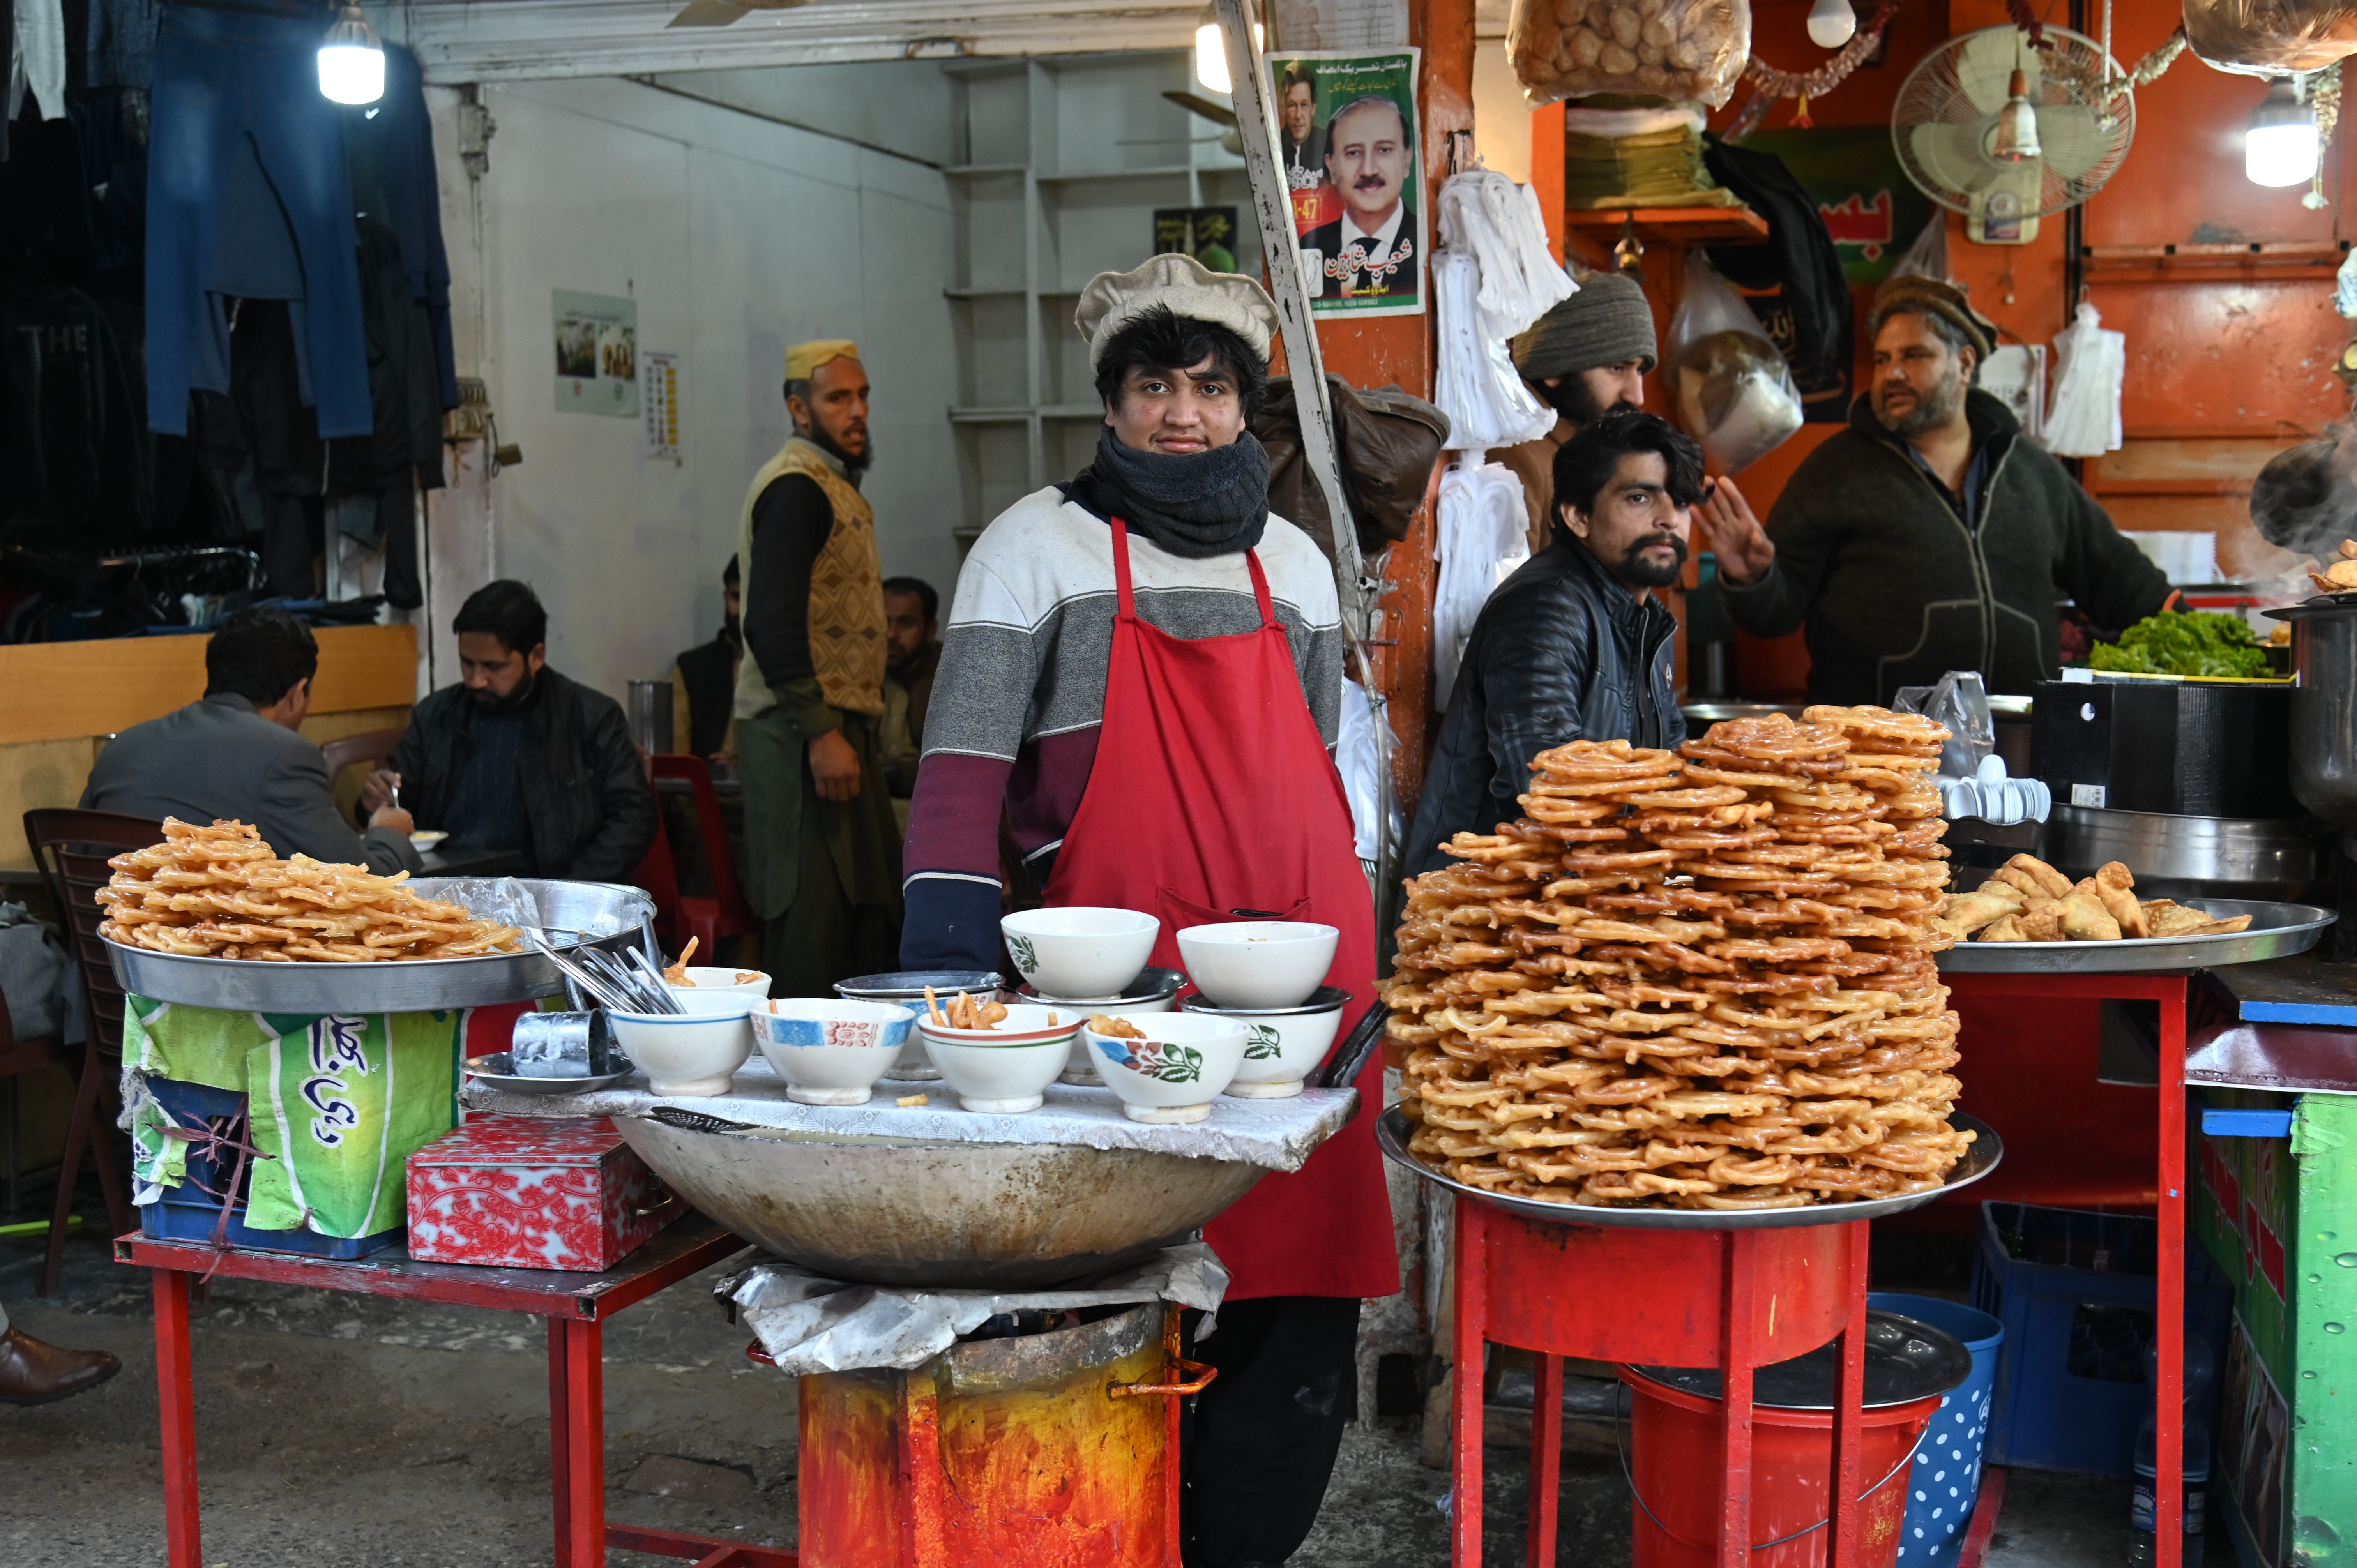 A man selling Jalebi, a popular sweet snack in South Asia